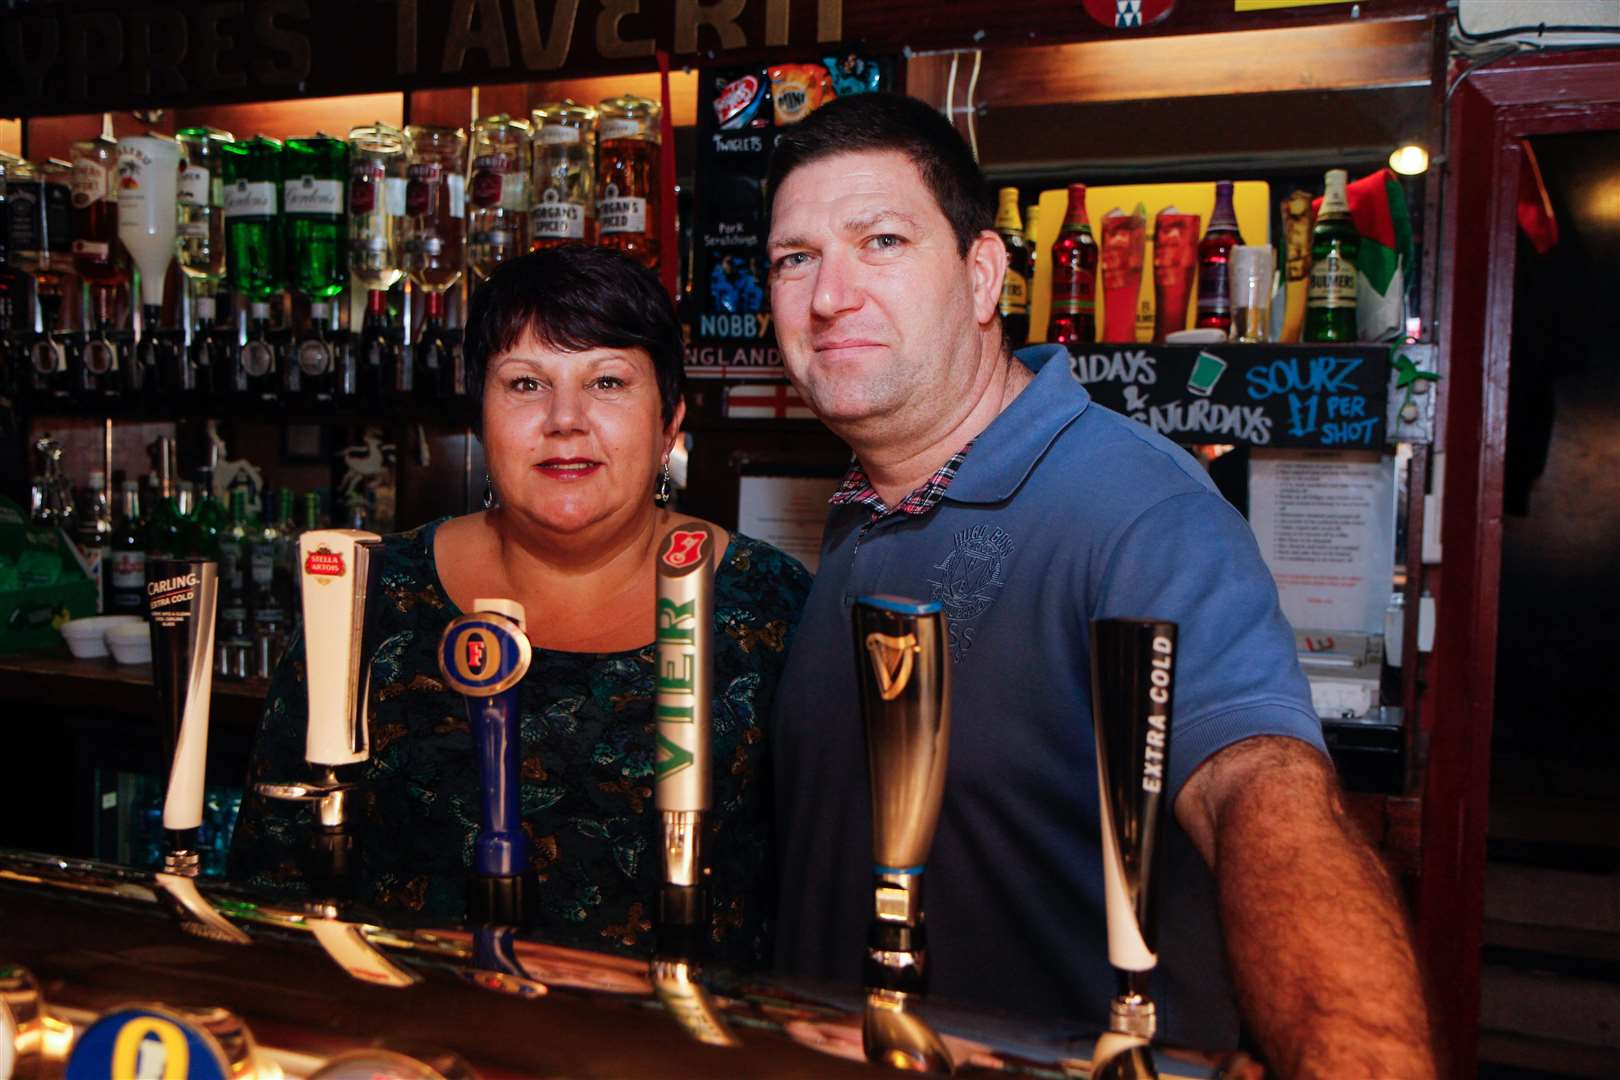 Debbie and Darren Rousell, owners of the Ypres Tavern in West Street, are against plans to turn the town's former Magistrates Court into a pub